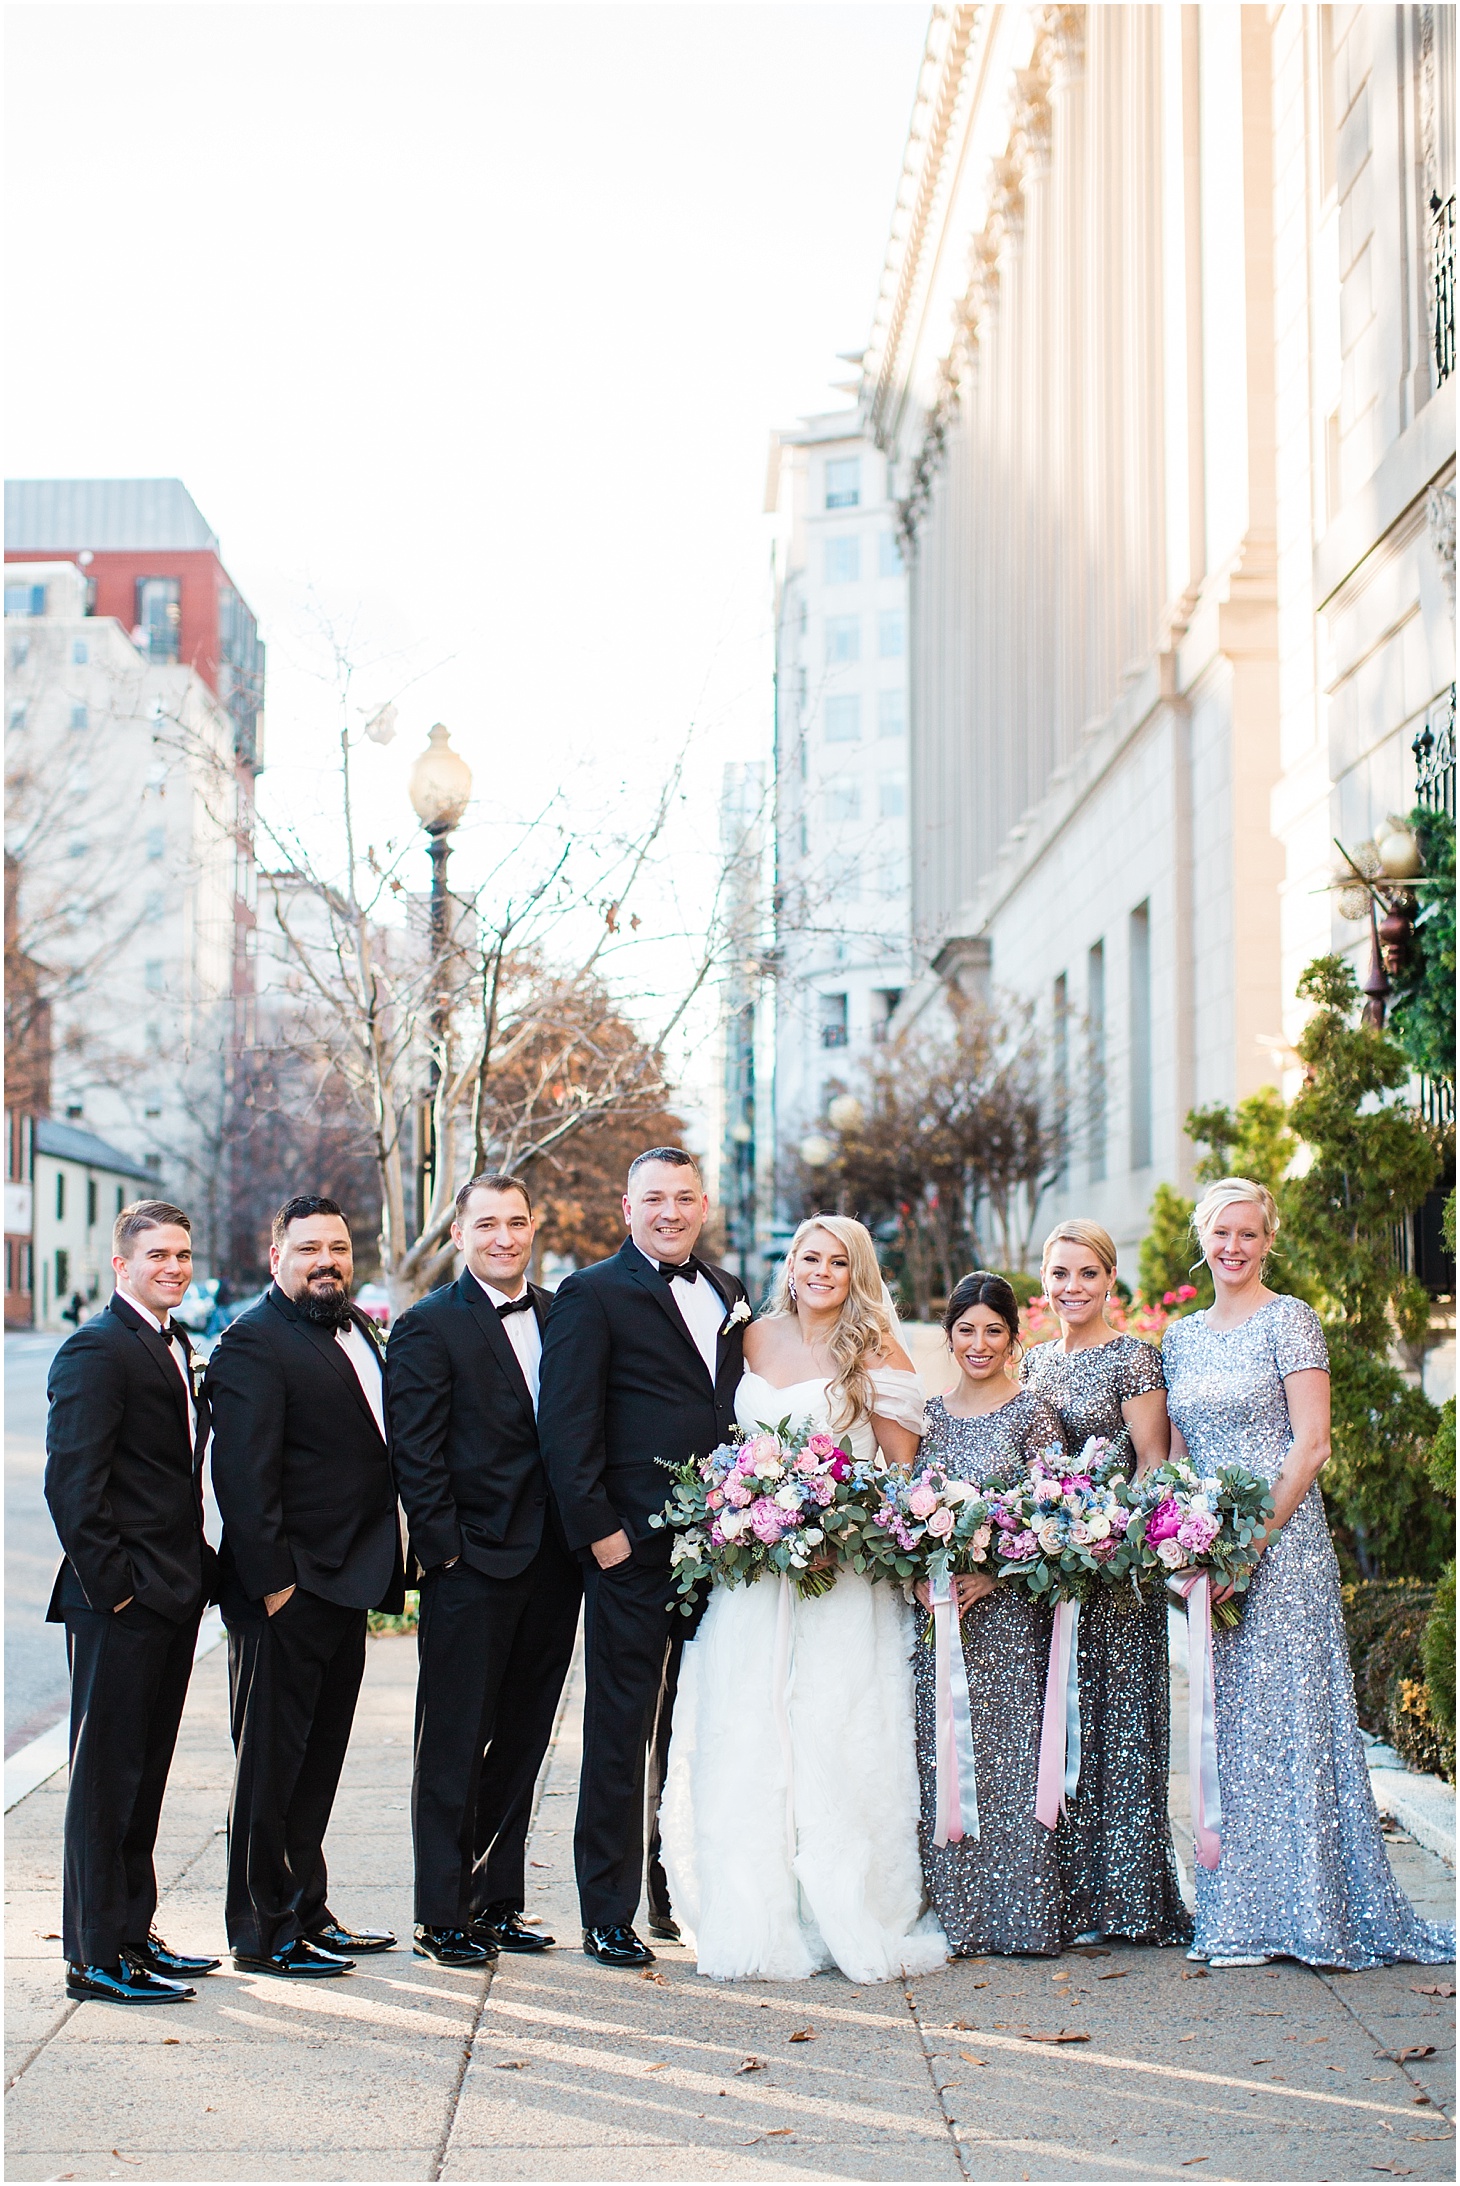 Wedding Party Portraits at the Army and Navy Club | Luxe Winter Wedding in Washington, DC | Sarah Bradshaw Photography | Washington DC Wedding Photographer